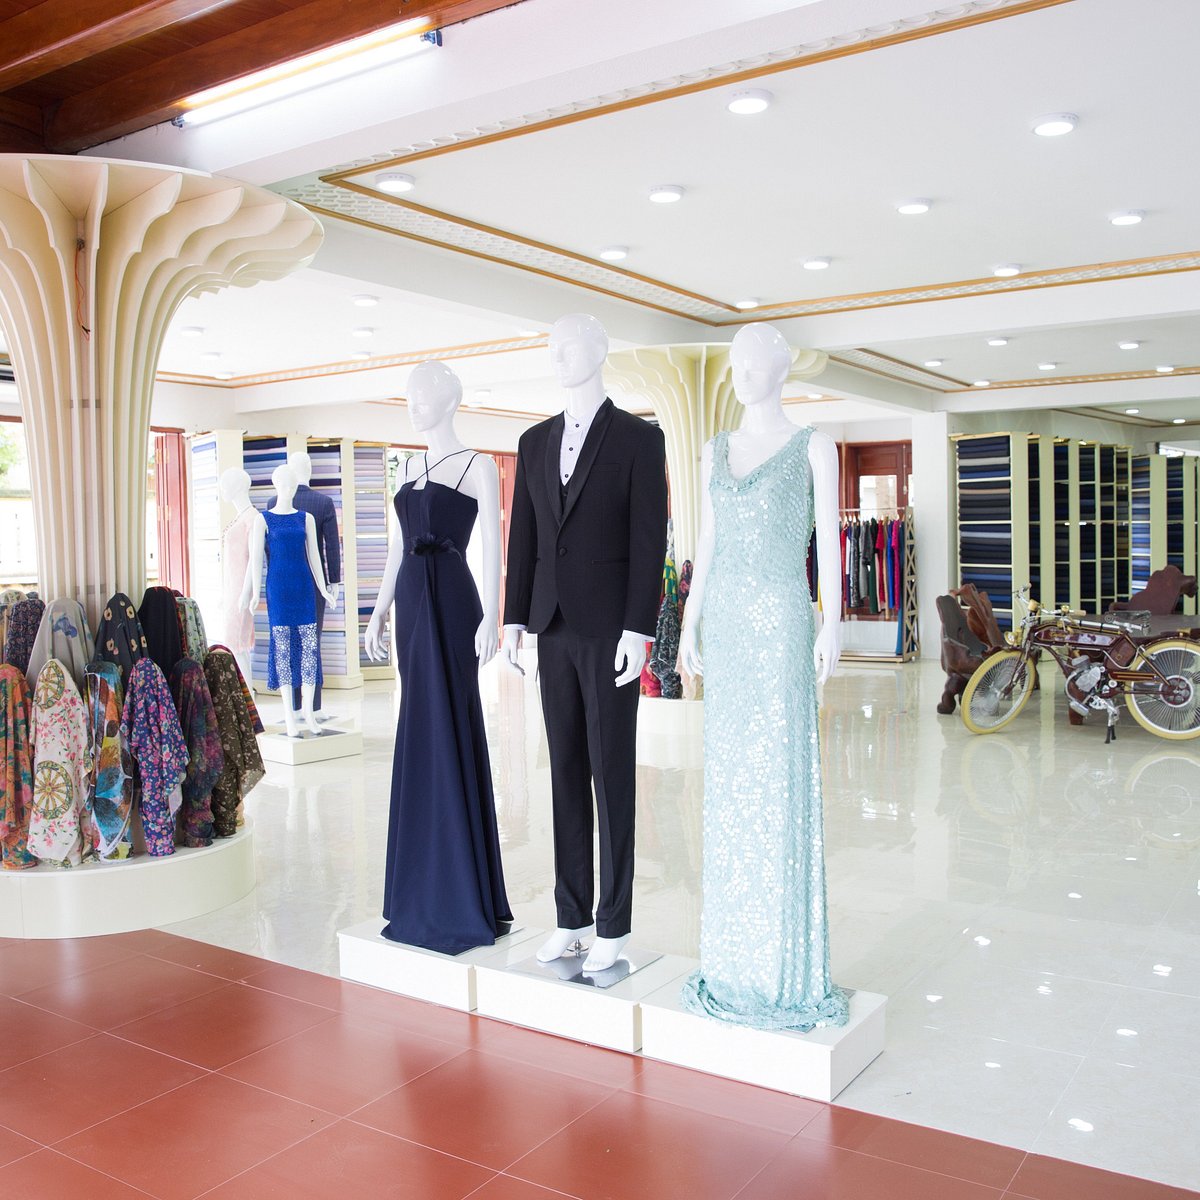 Opinion: From couture to coffee, retailers are tailoring shops to